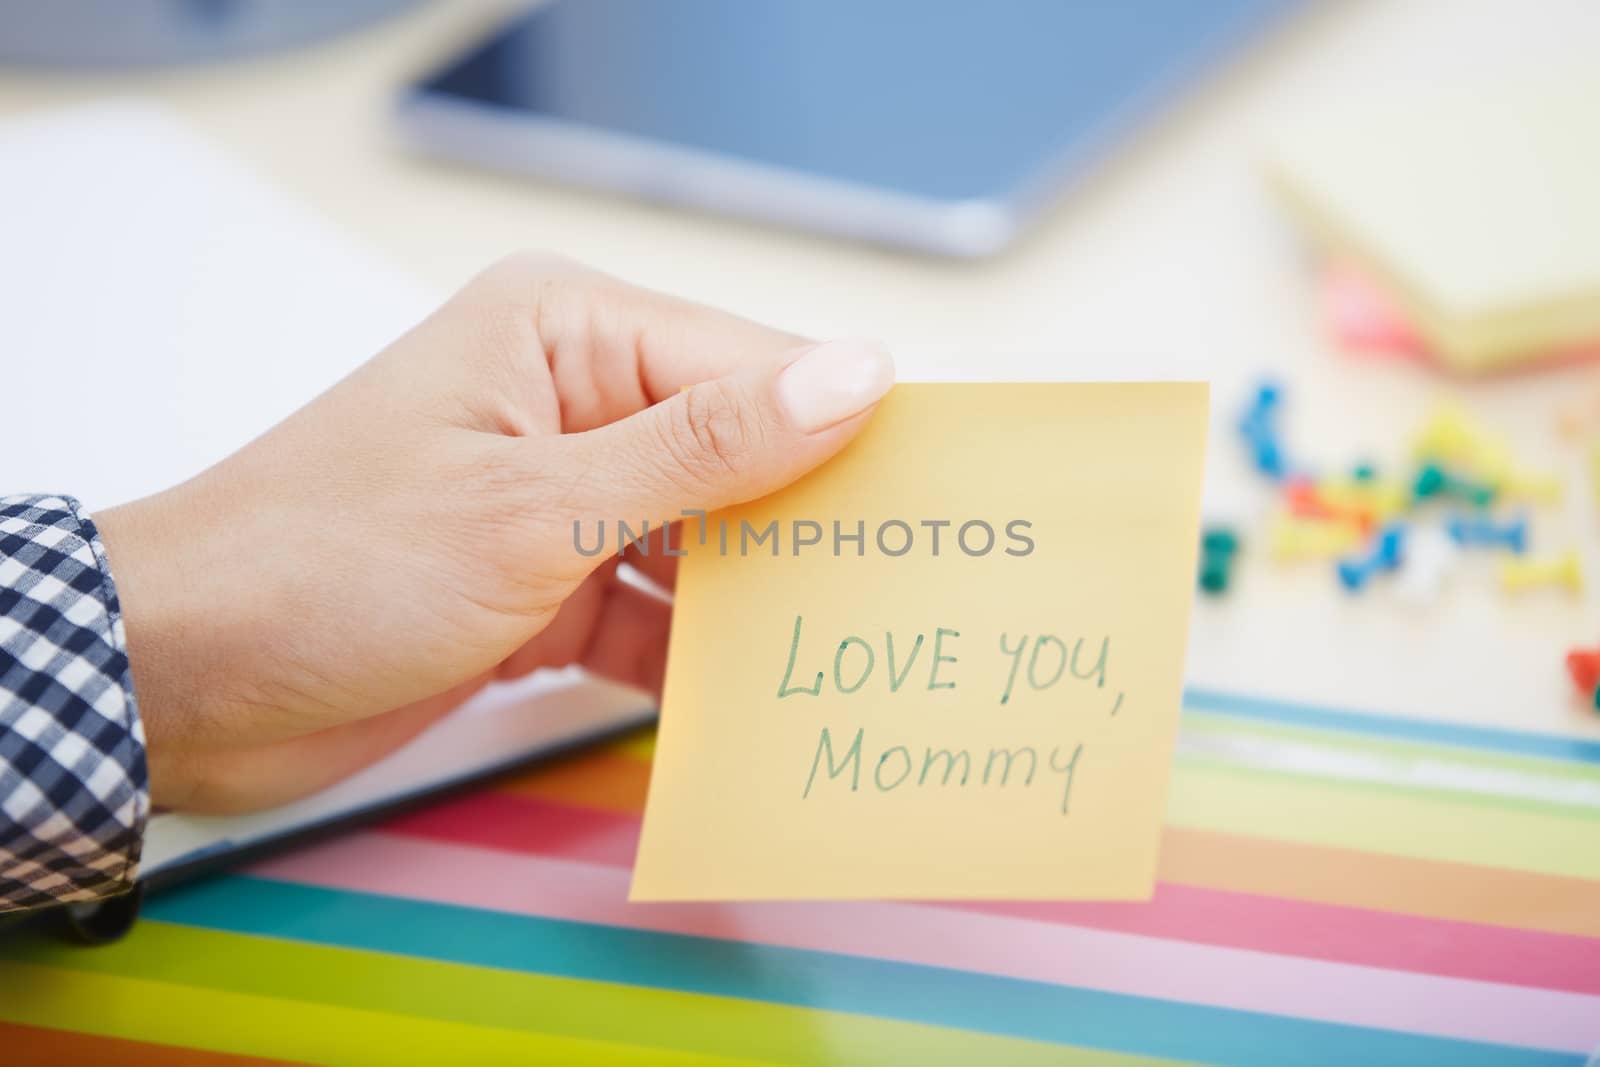 Human hand holding adhesive note with Love you mommy text